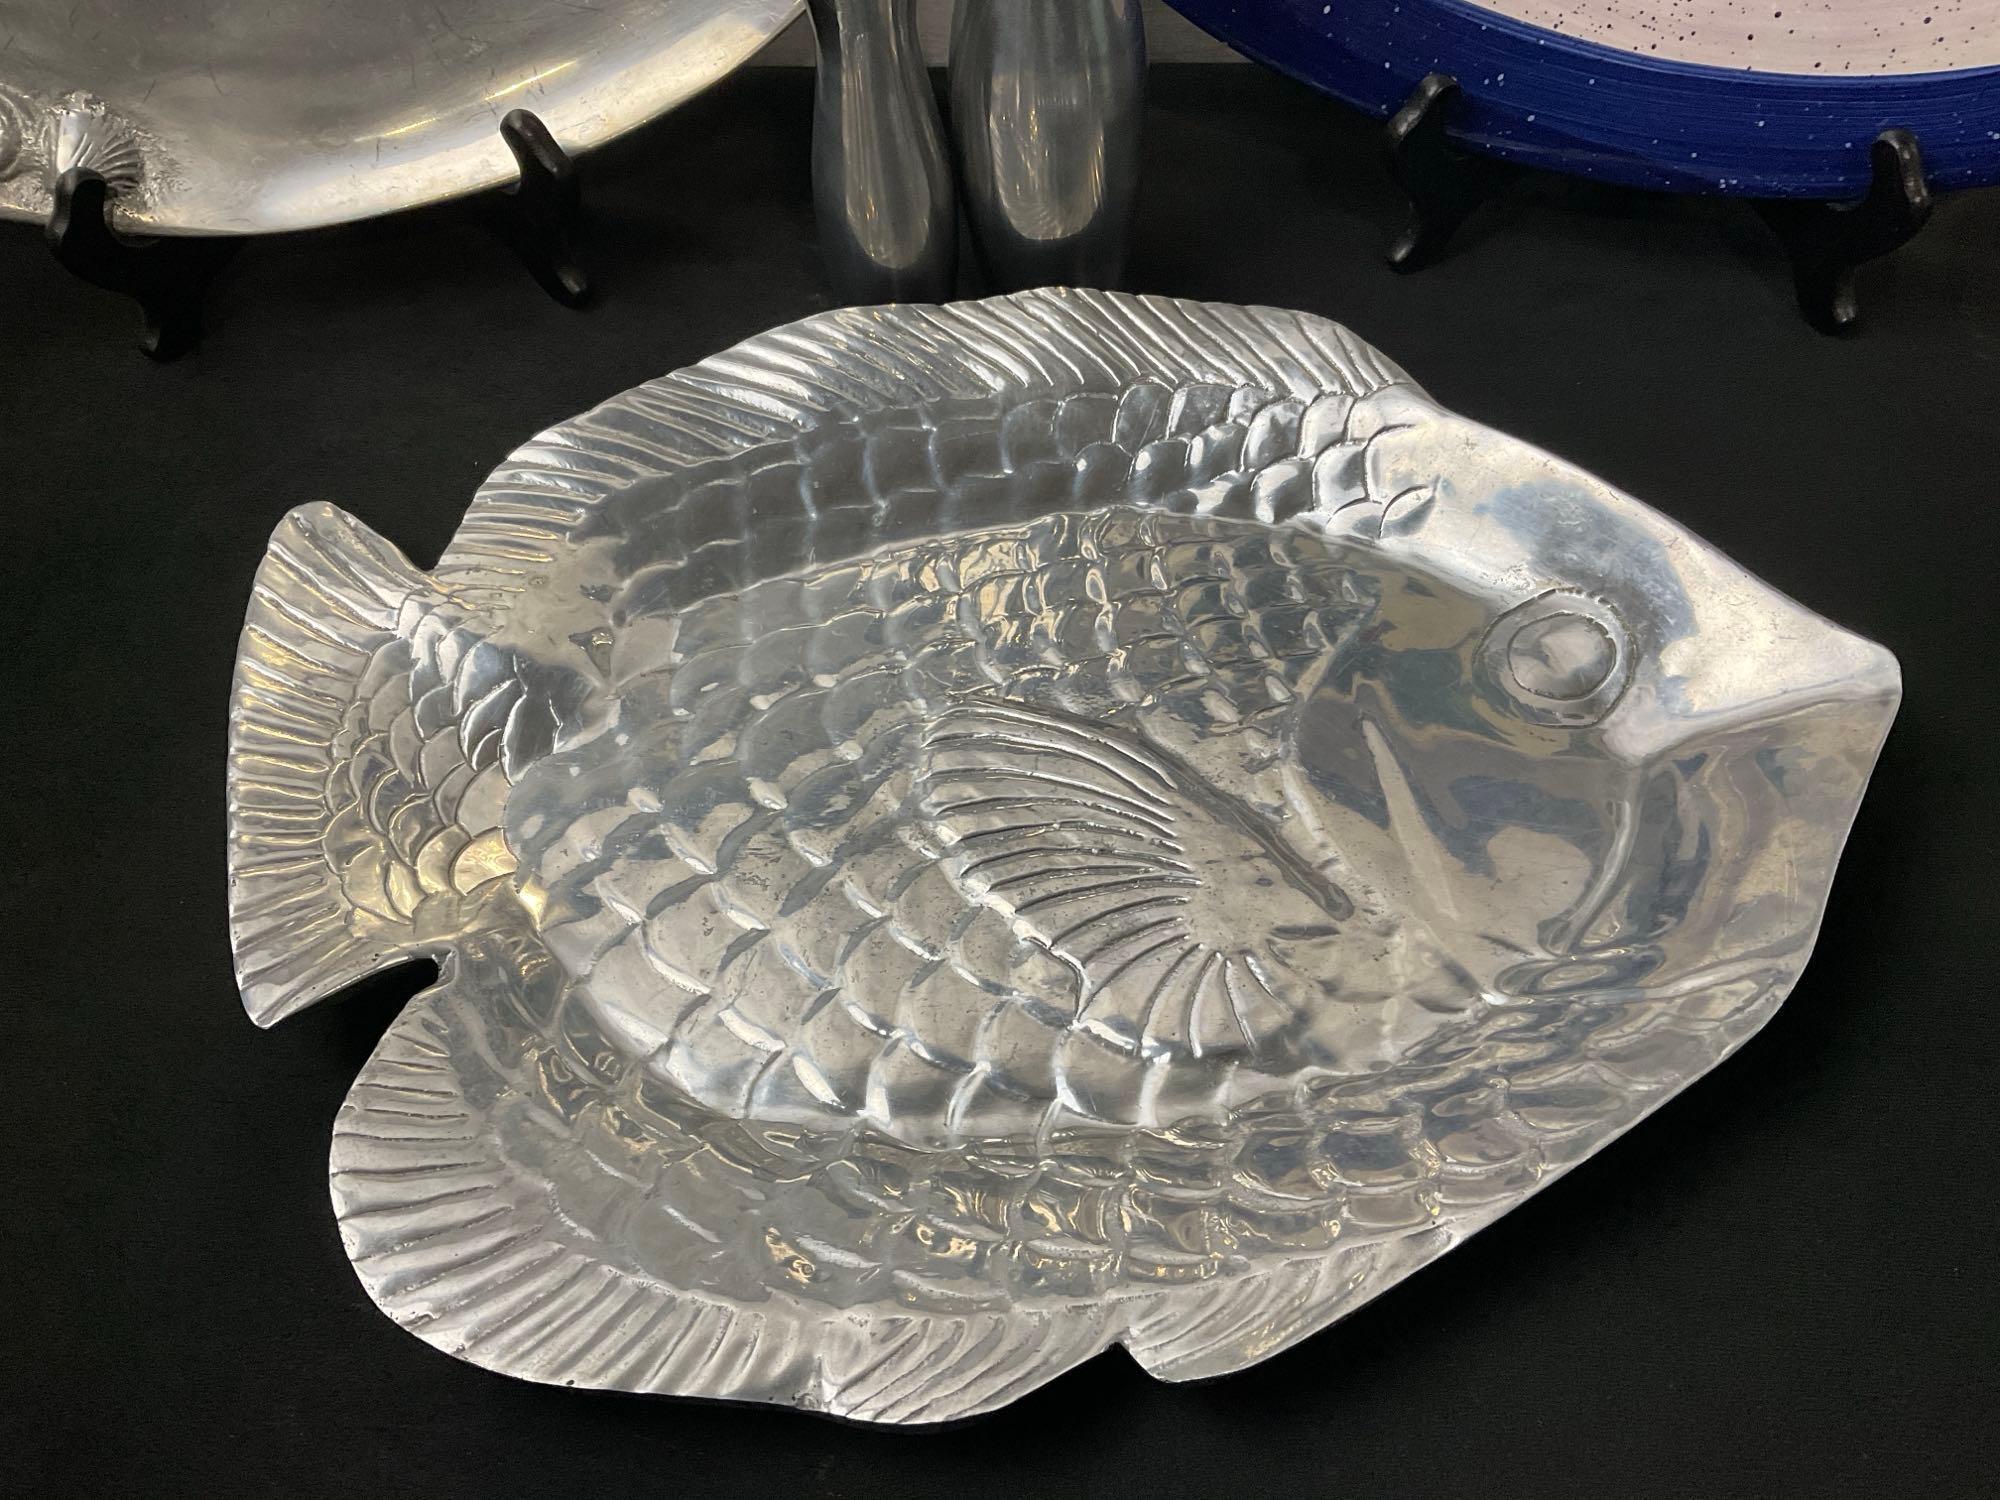 3 Large Fish Platters, 1x Indian made w/ shells, Shorelines by Julie Ueland, and silver metal Fish